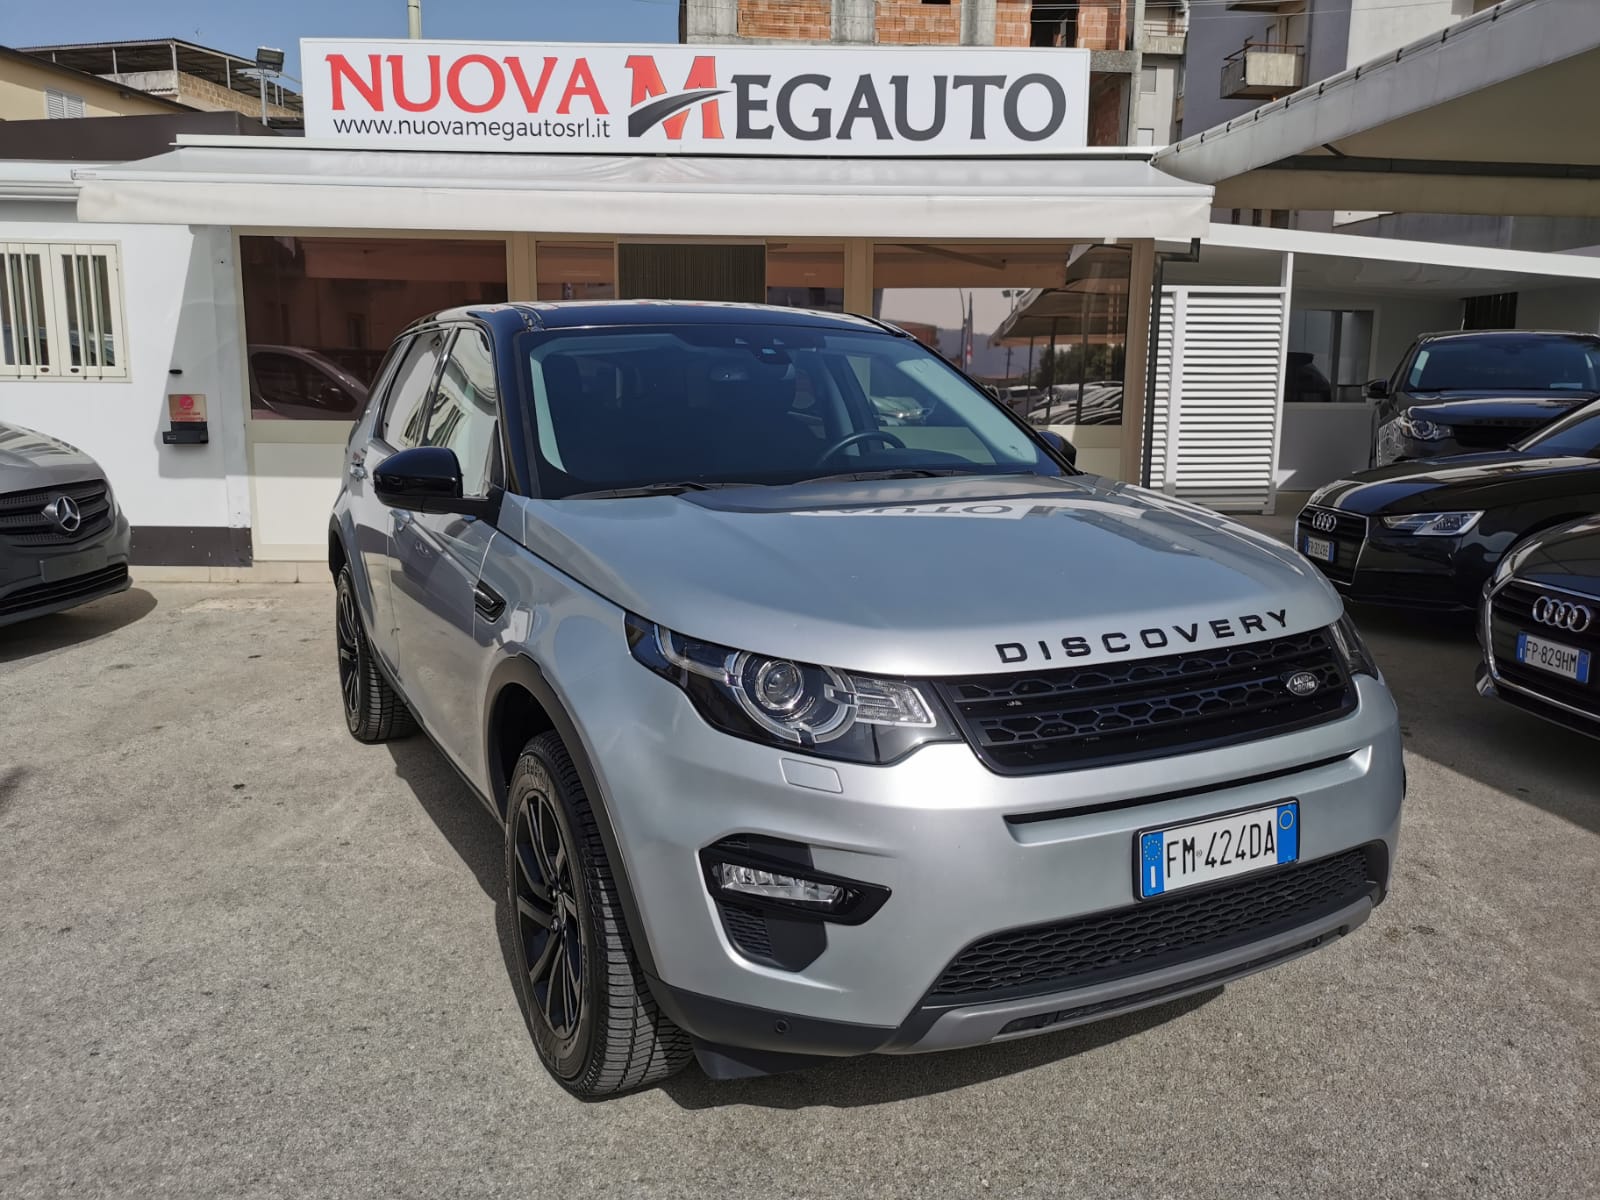 LAND ROVER DISCOVERY SPORT 2.0 TD4 150 CV